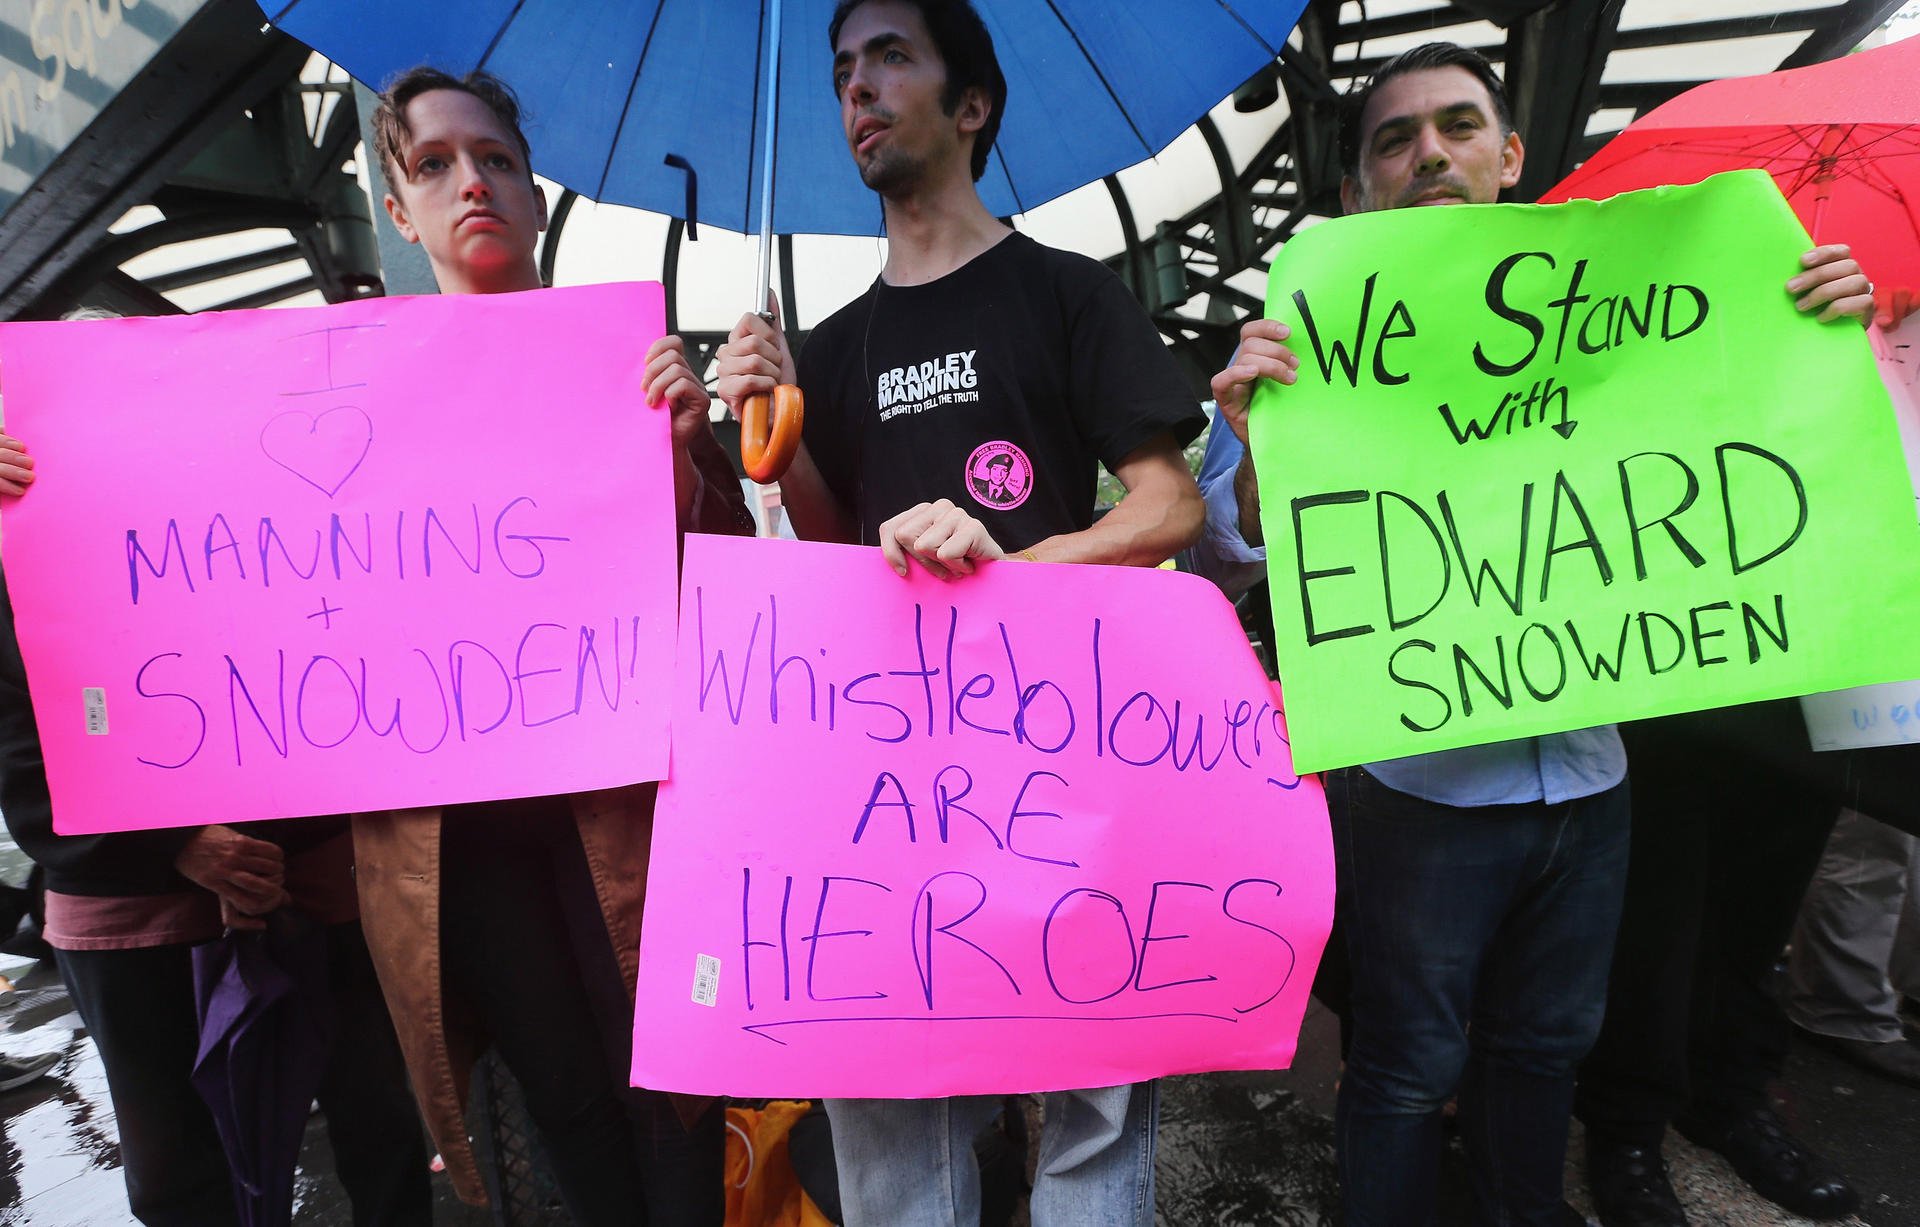 Supporters of whistle-blower Edward Snowden rally in Manhattan's Union Square after his identity was revealed. Photo: AFP